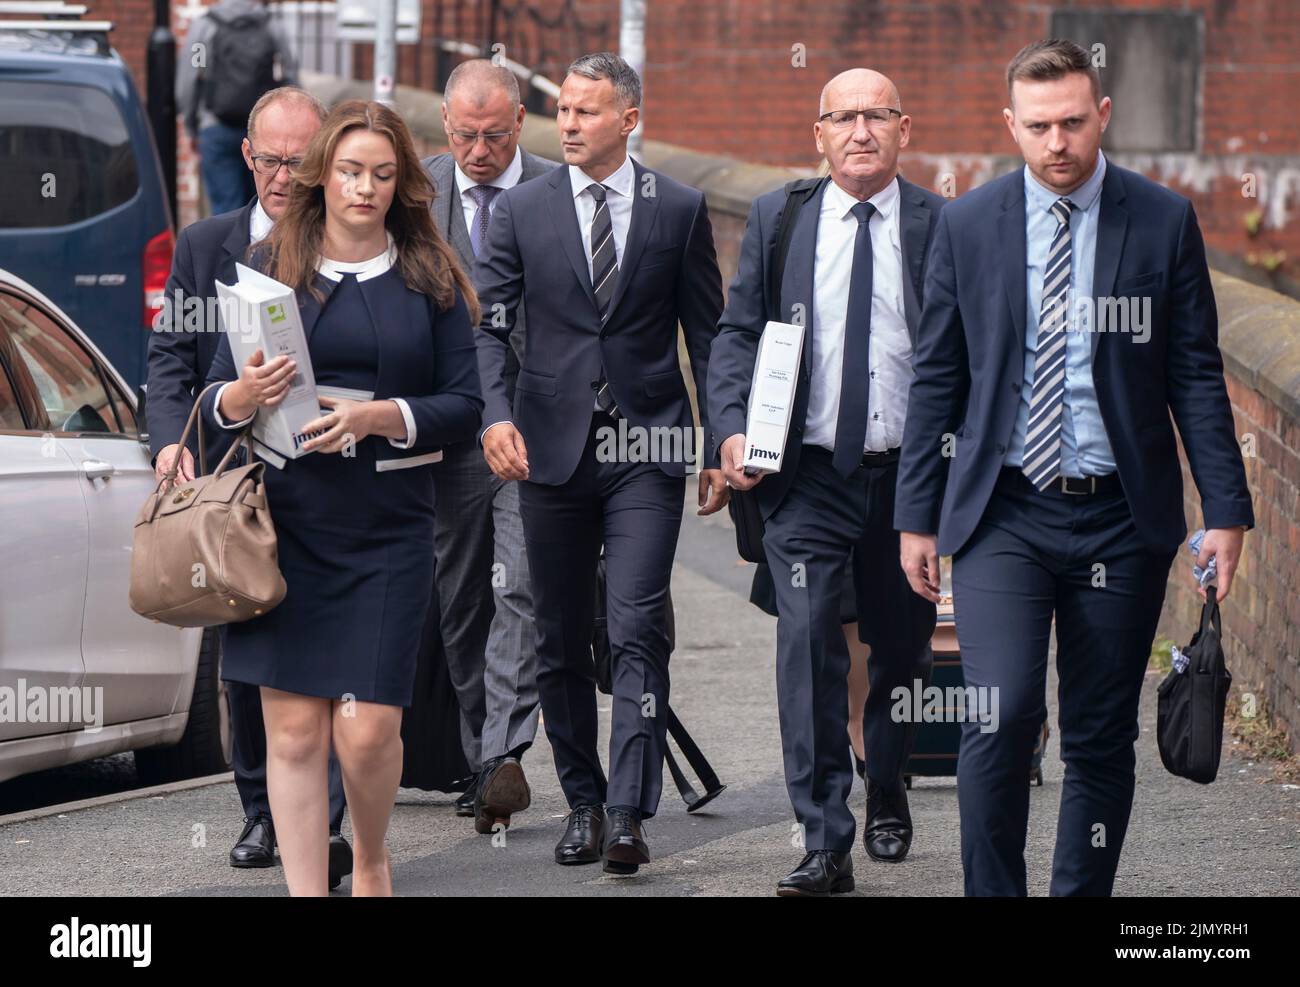 Former Manchester United footballer Ryan Giggs arrives at Manchester Minshull Street Crown Court where he is accused of controlling and coercive behaviour against ex-girlfriend Kate Greville between August 2017 and November 2020. Picture date: Monday August 8, 2022. Stock Photo